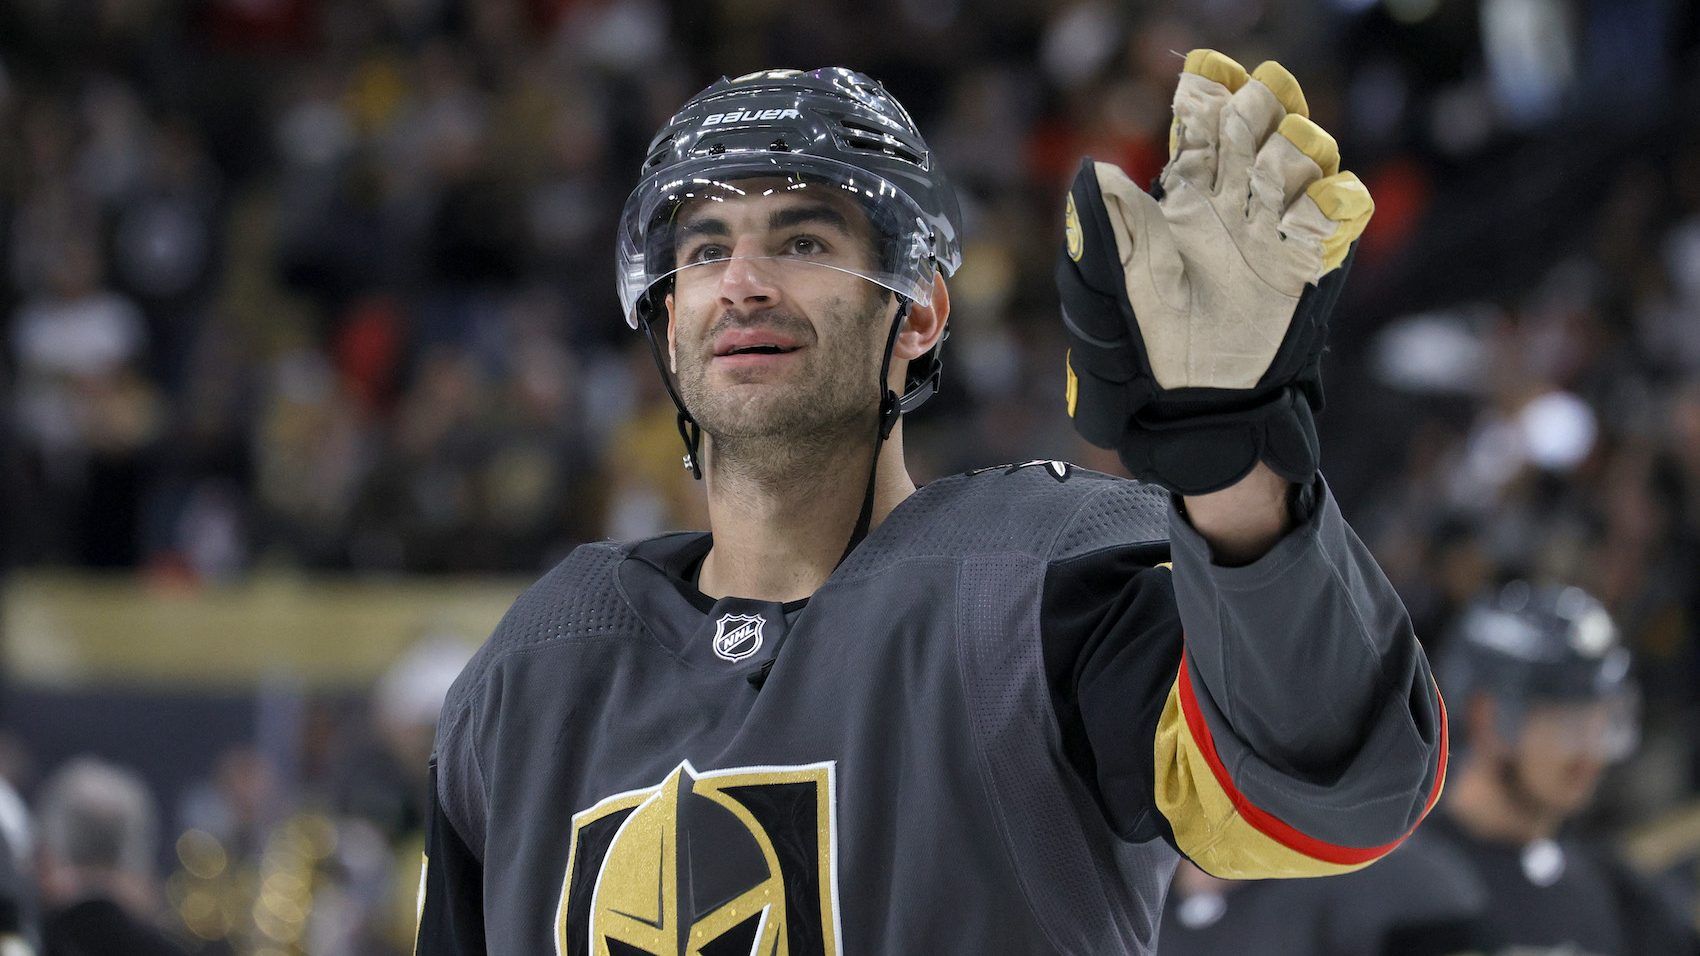 Max Pacioretty, previously of the Vegas Golden Knights waves as he celebrates the team's 6-2 victory over the Minnesota Wild. (Photo by Ethan Miller/Getty Images) ORG XMIT: 775655063